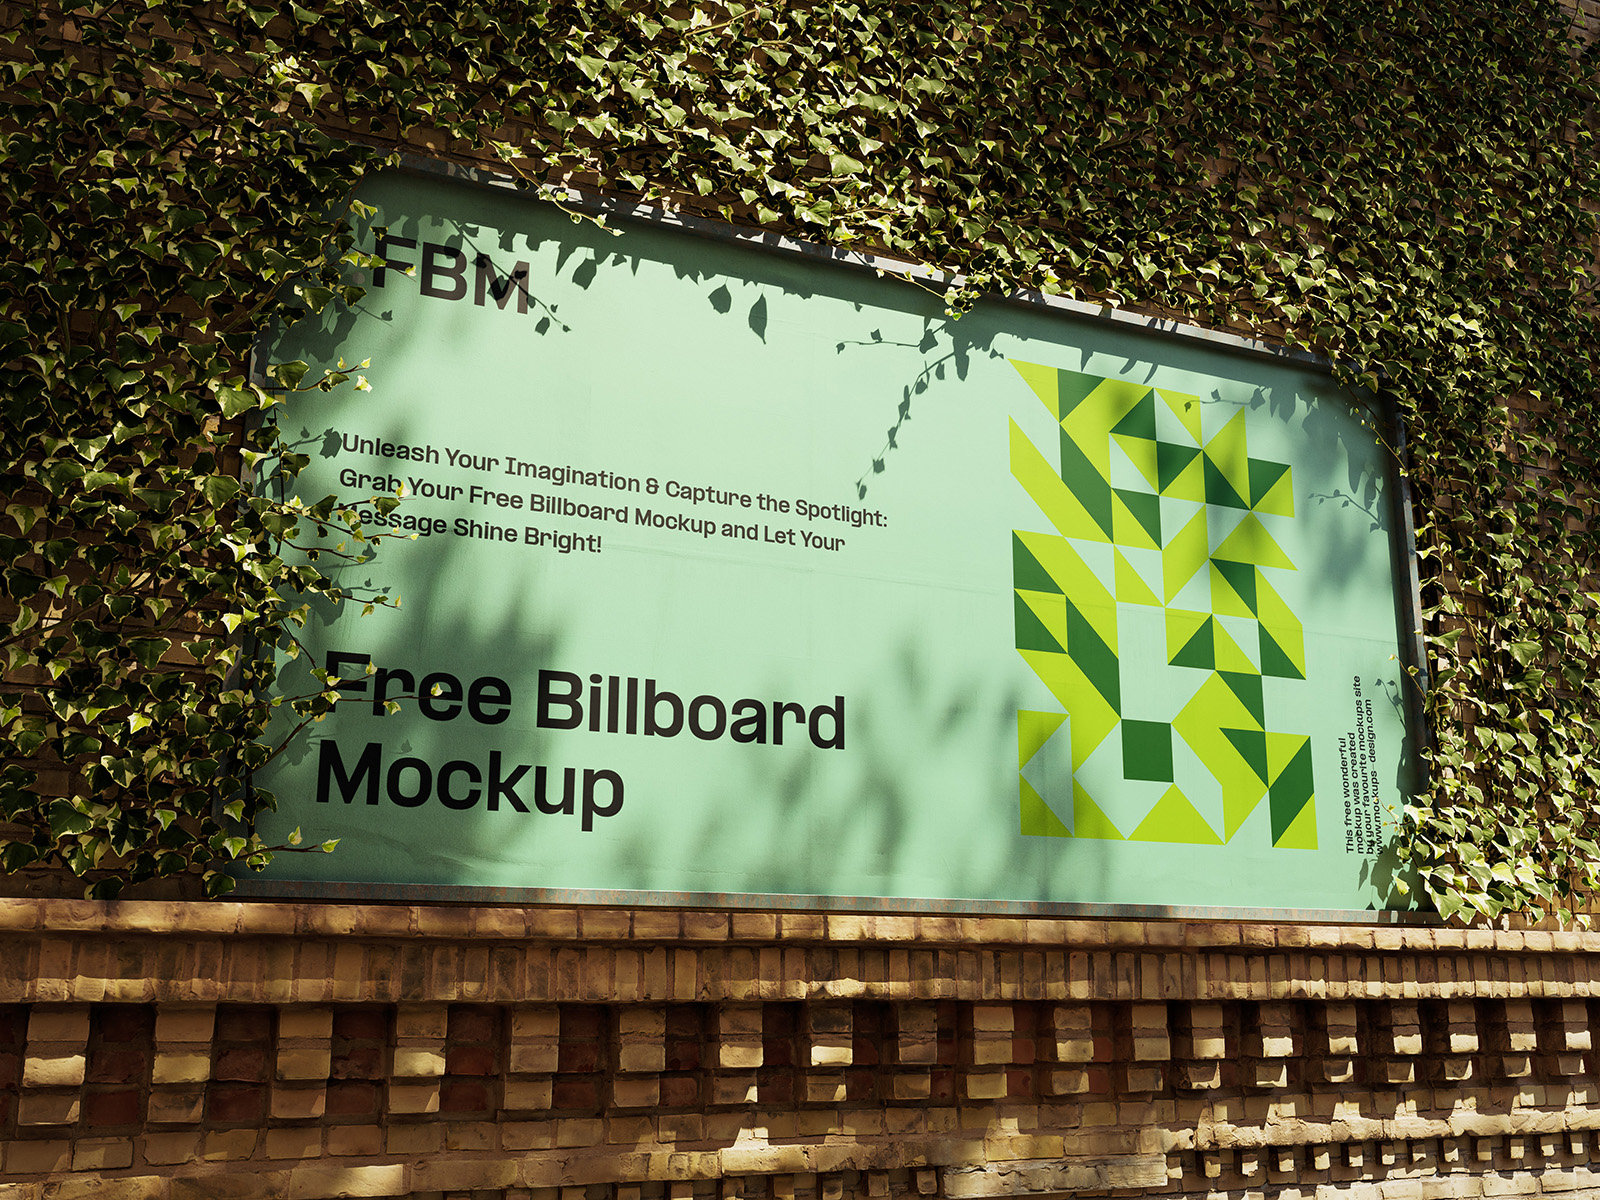 3 Billboard Mockup Covered with Ivy in Different Sights FREE PSD